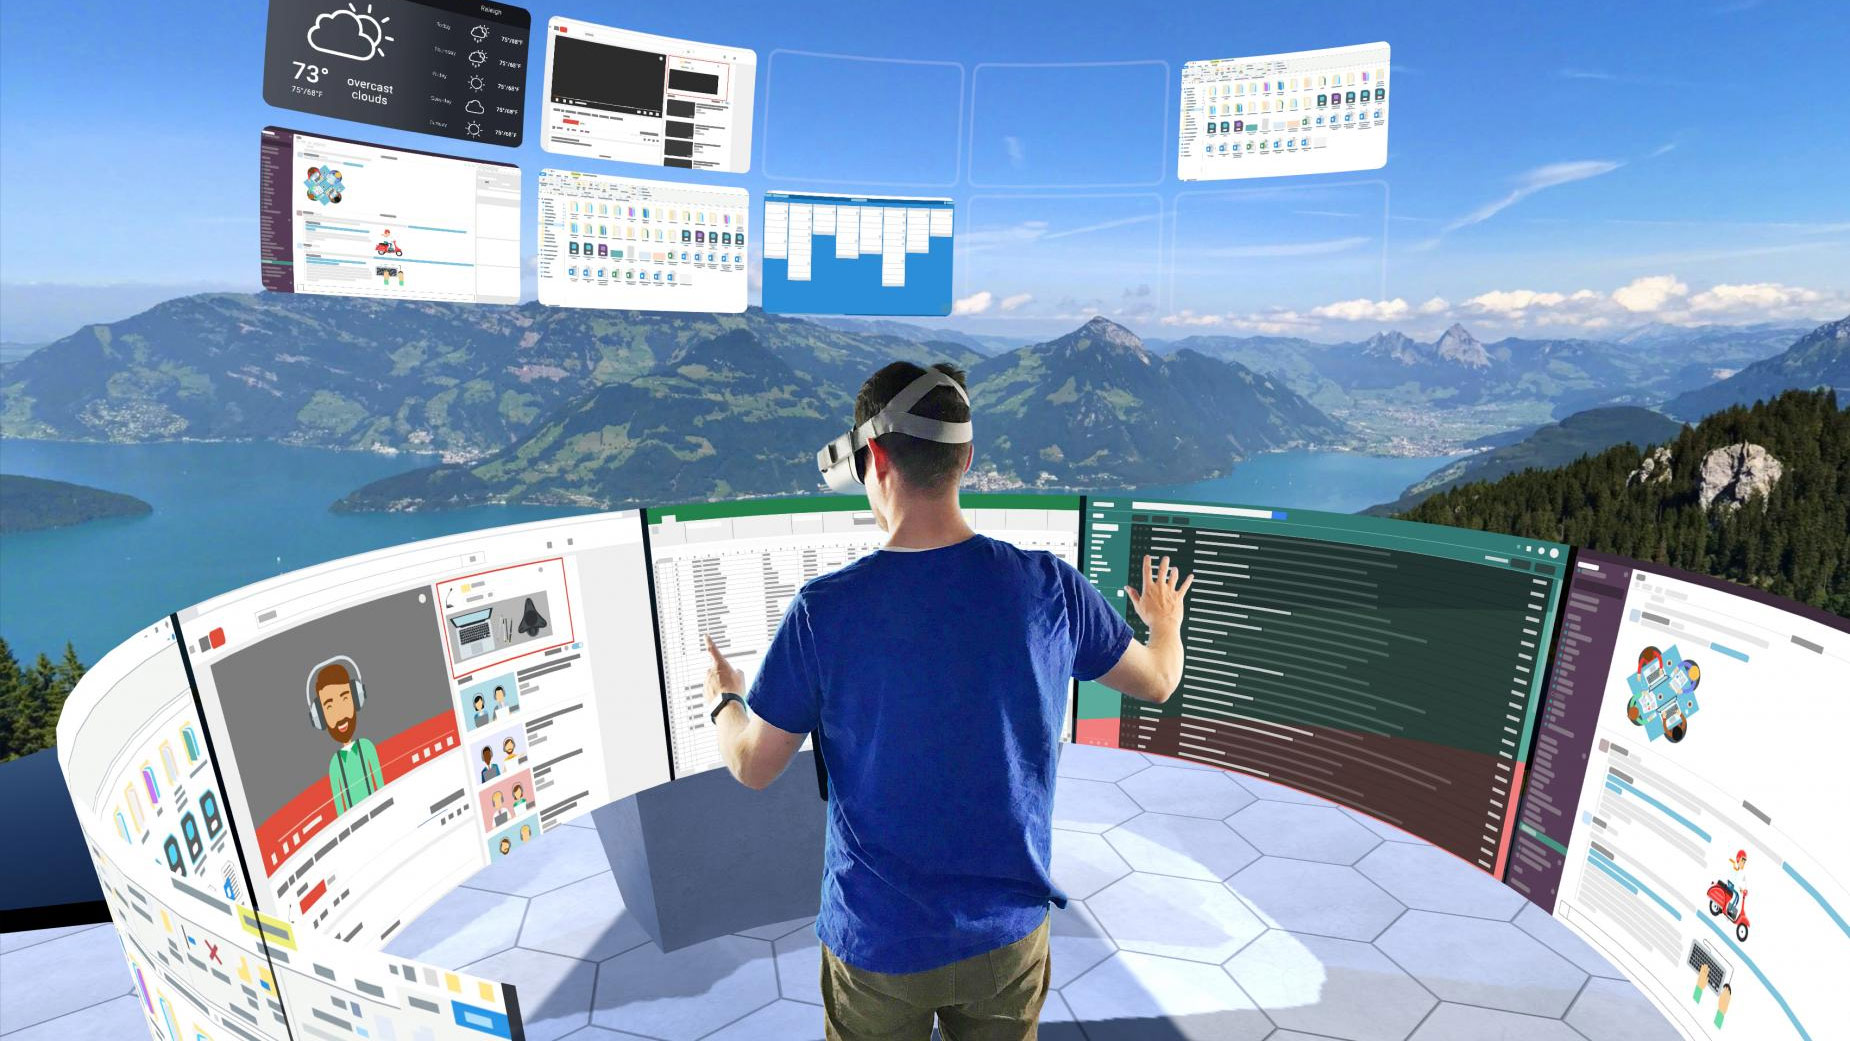 Top interesting VR apps and tools / VR headsets